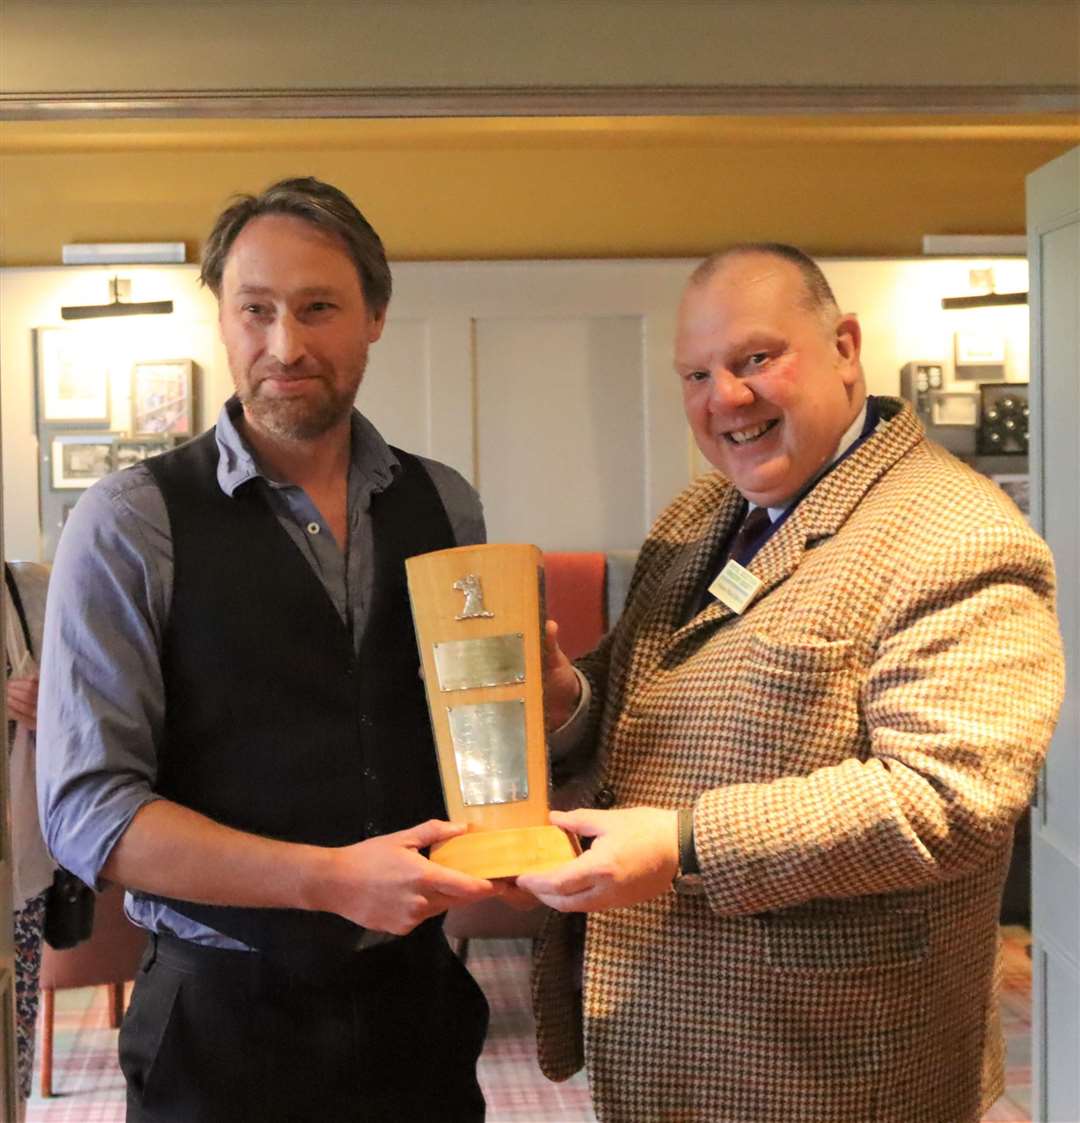 Dr Euan Bowditch (left) receiving the trophy from Simon MacGillivray.